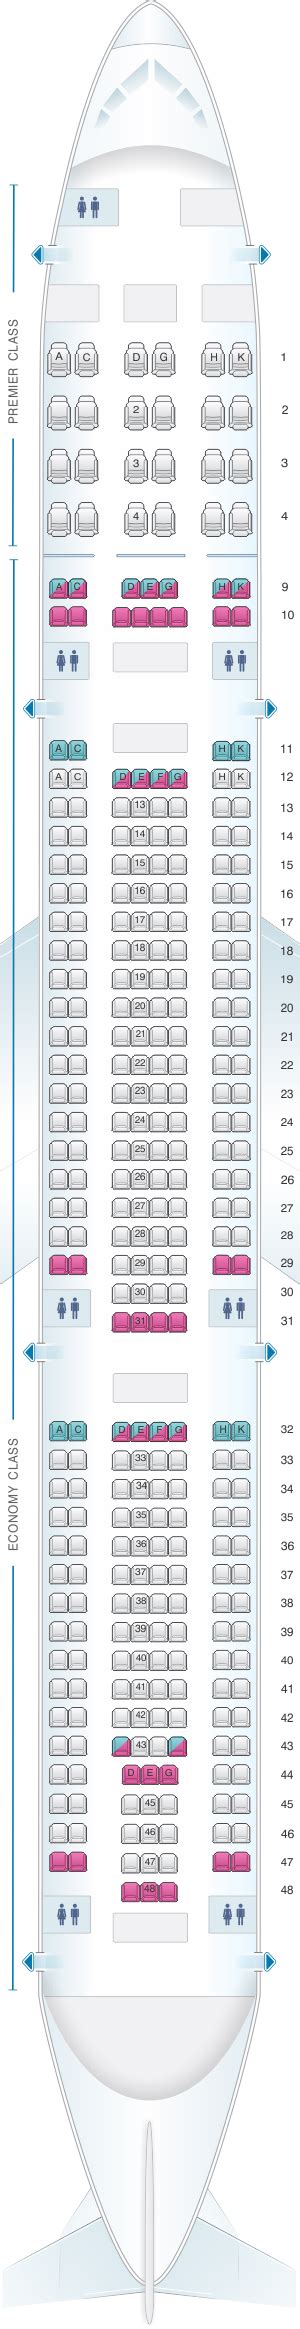 Seat Map Aer Lingus Airbus A330 300